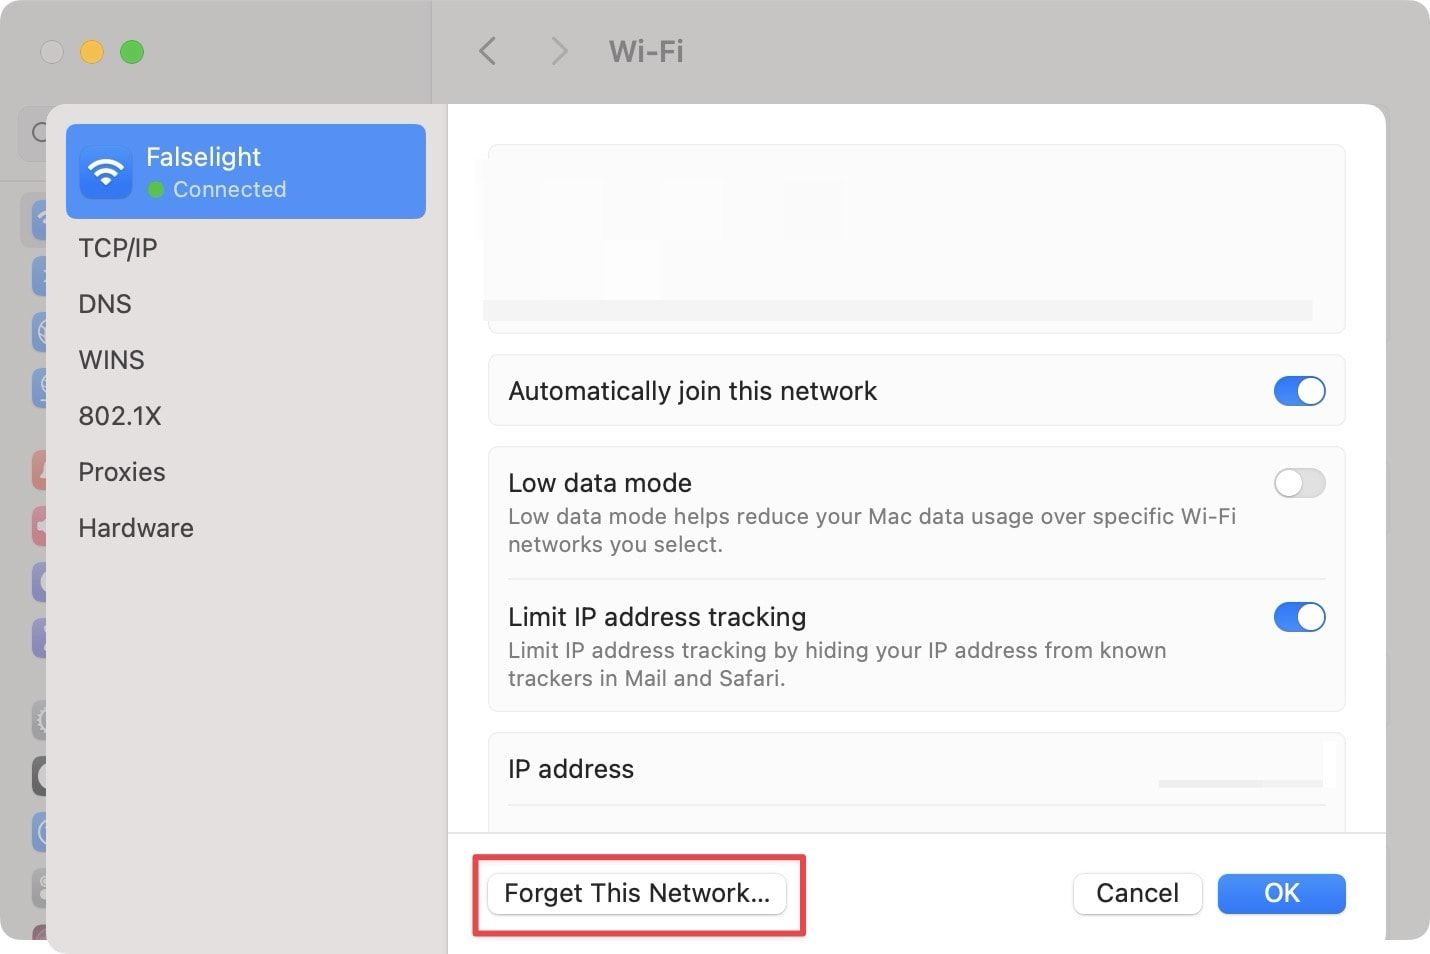 Wi-Fi setting screenshot showing the Forget This Network... button